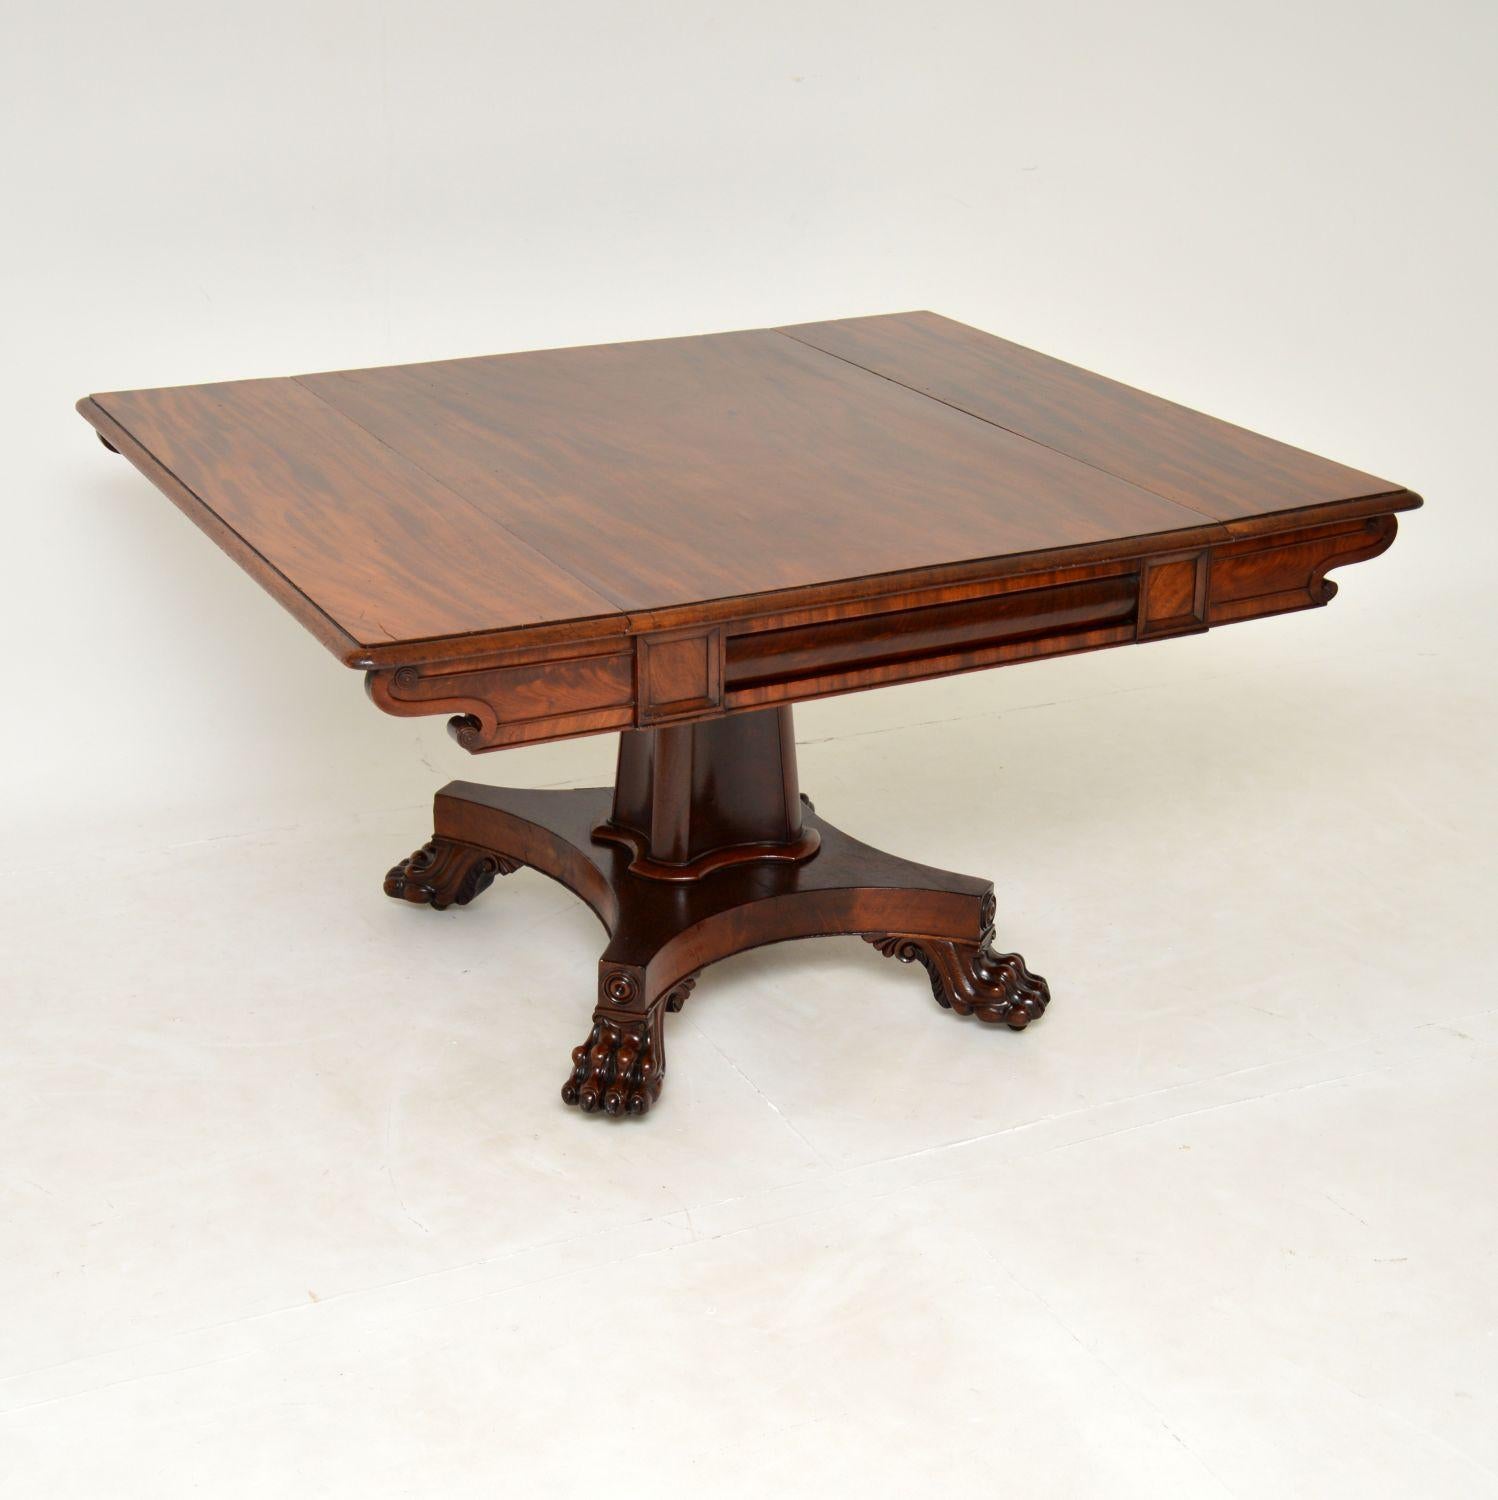 A fantastic original William IV period drop leaf table in solid wood. This was made in England, it dates from around 1830-1840 period.

The quality is absolutely amazing, it sits on a superb central column with a wide platform base, and finely